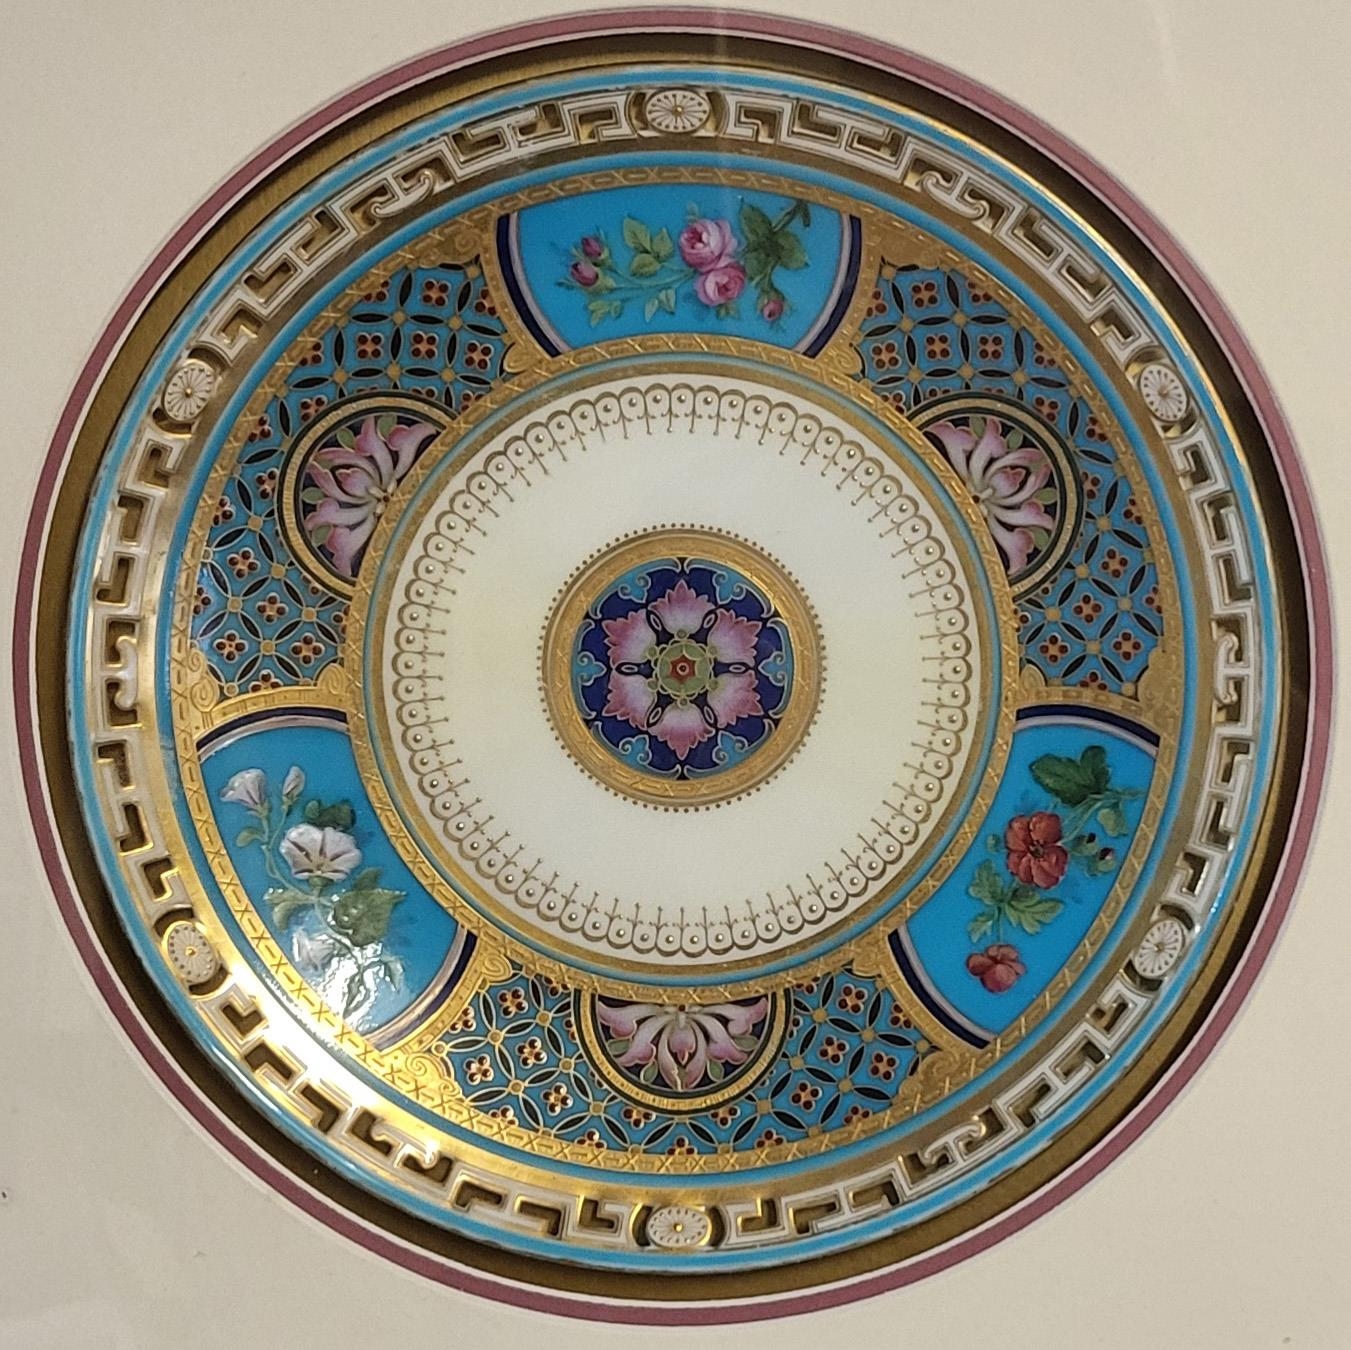 A 19TH CENTURY MINTON PORCELAIN AESTHETIC MOVEMENT CABINET PLATE Designed by Dr. Christopher - Image 3 of 5